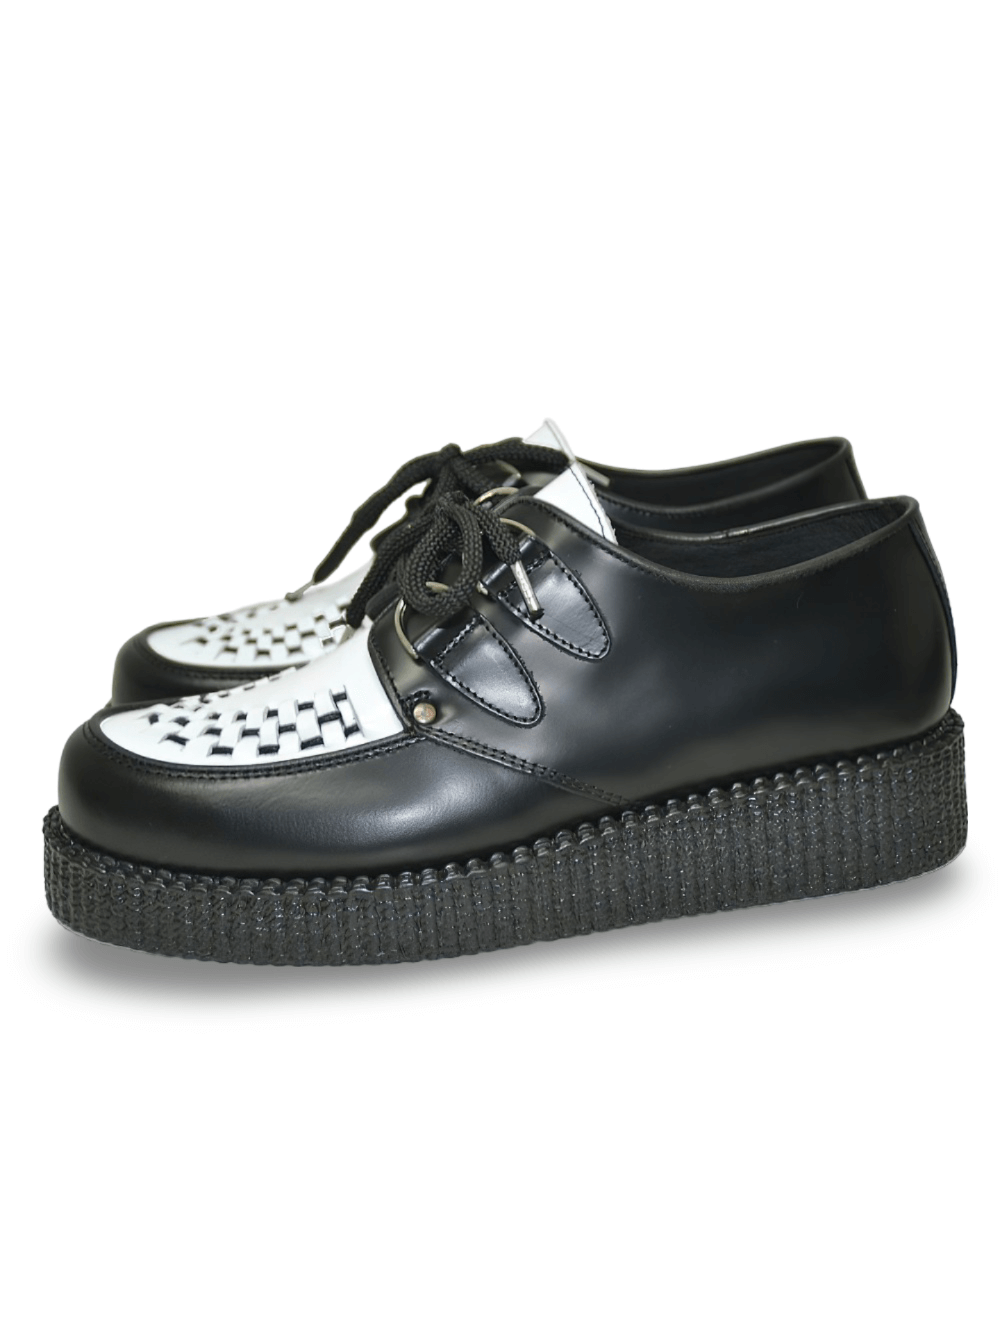 Chic Black and White Creepers with Rubber Sole